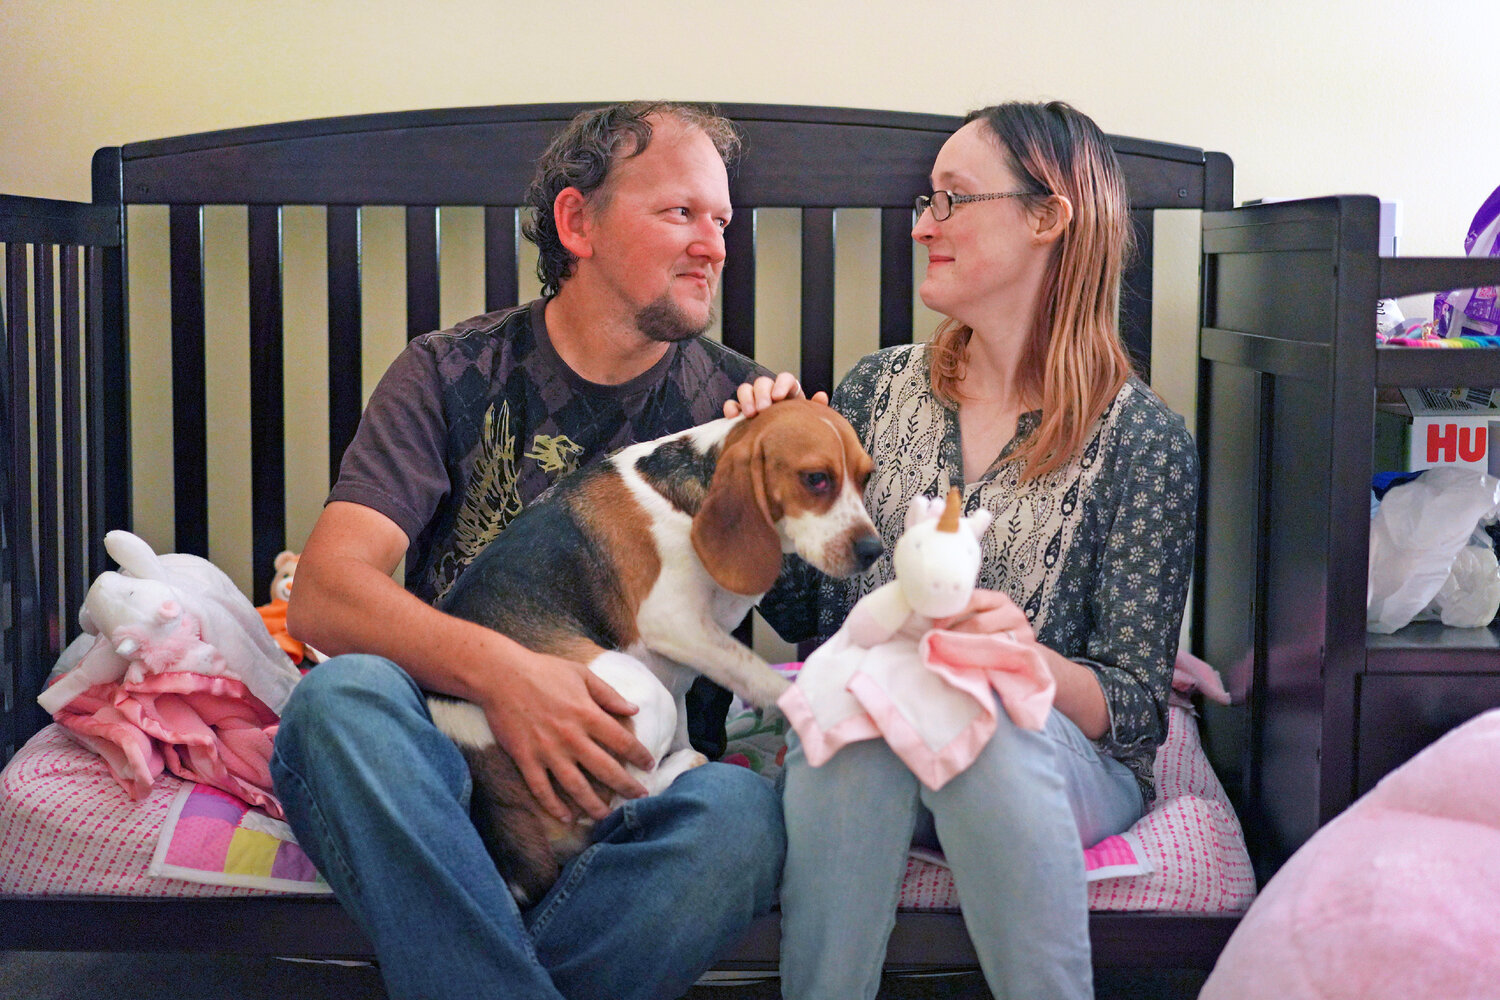 Andrew and Lauren Hackney sit in their daughter's room with their dog Scrappy after one of their twice-weekly supervised visits, in Oakdale, Pa., on Thursday, Nov. 17, 2022. At 7 months old, the couple had difficulty feeding their daughter and brought her to the children's hospital in Pittsburgh. They believe hospital staff alerted the Allegheny County Department of Human Services because the baby was severely dehydrated and malnourished, which resulted in removing the young child from their custody. The Hackneys and their lawyer believe the Allegheny County Family Screening tool may have flagged the couple as dangerous because of their disabilities. Over a year later, they continue to fight for custody of their child.